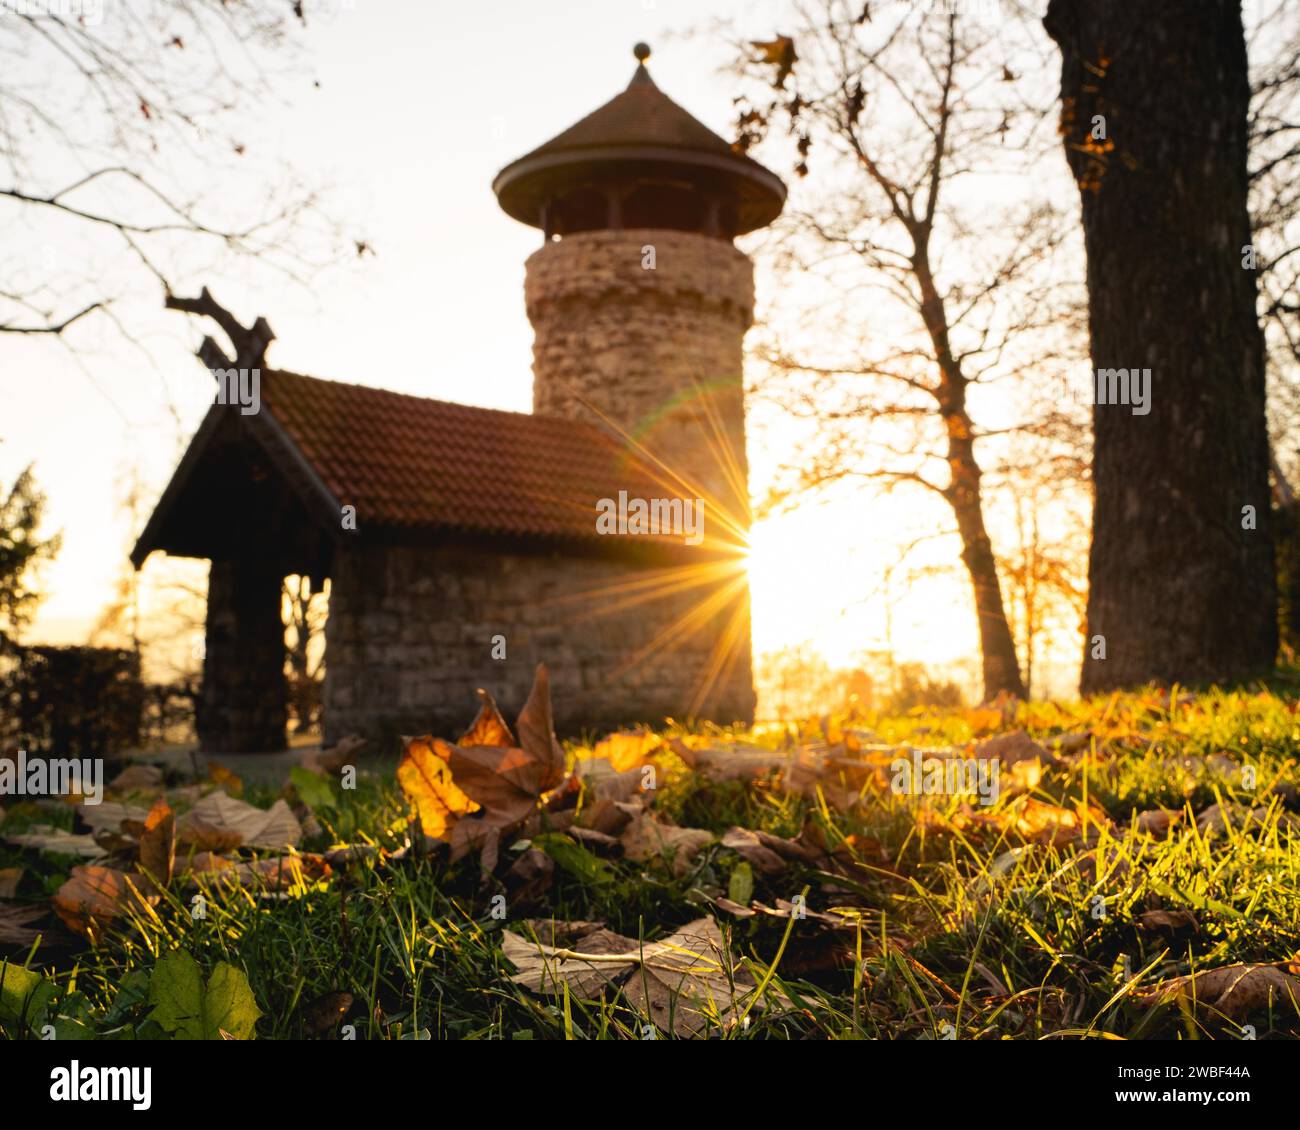 Golden sunlight floods over falling leaves with a view of an old tower, Hachelturm, Pforzheim, Germany Stock Photo